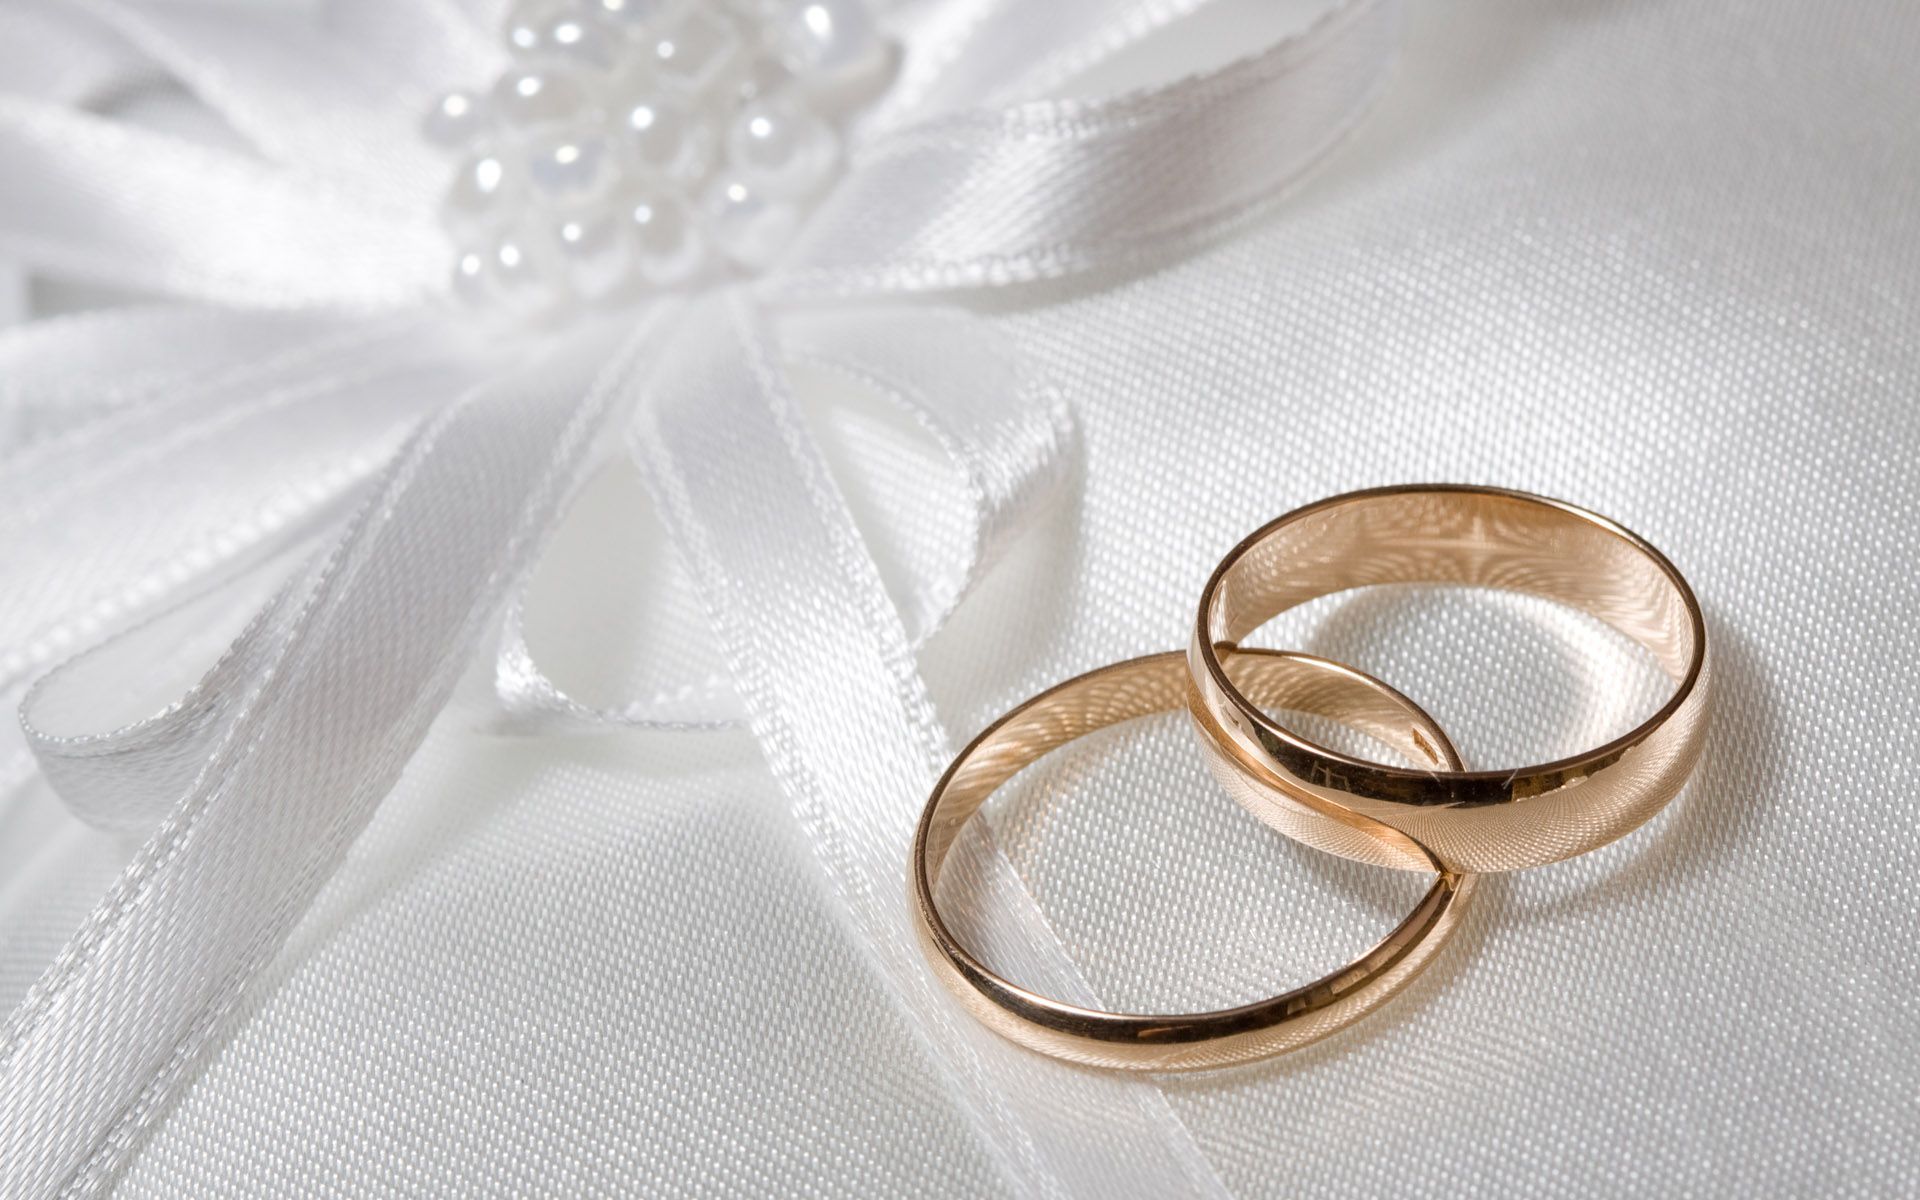 Two gold wedding rings on a white cloth - Wedding